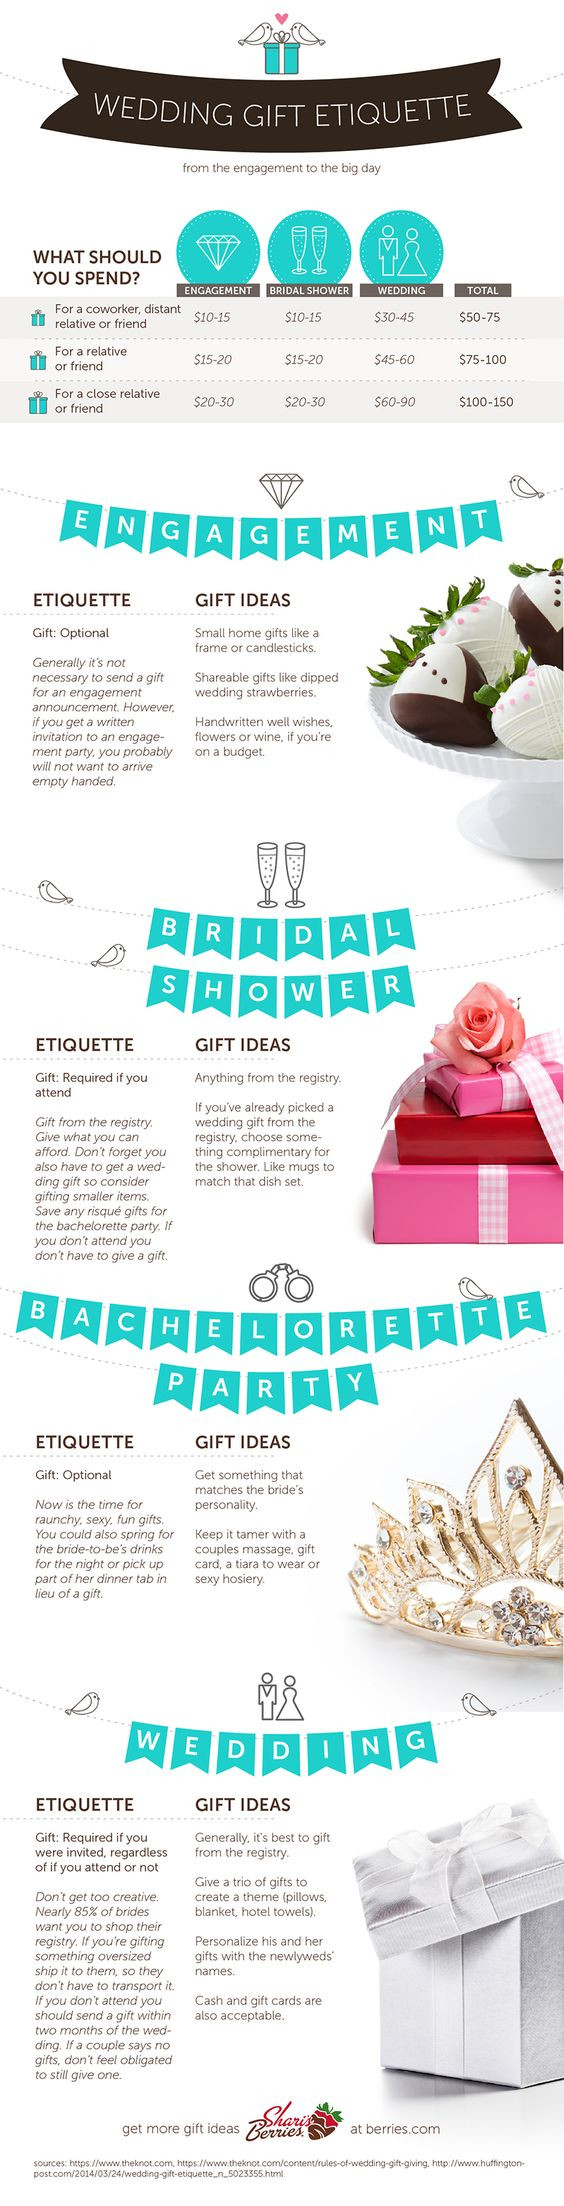 How Much Should I Give For A Wedding Gift
 Wedding Gift Guide and Etiquette Do I need a t for